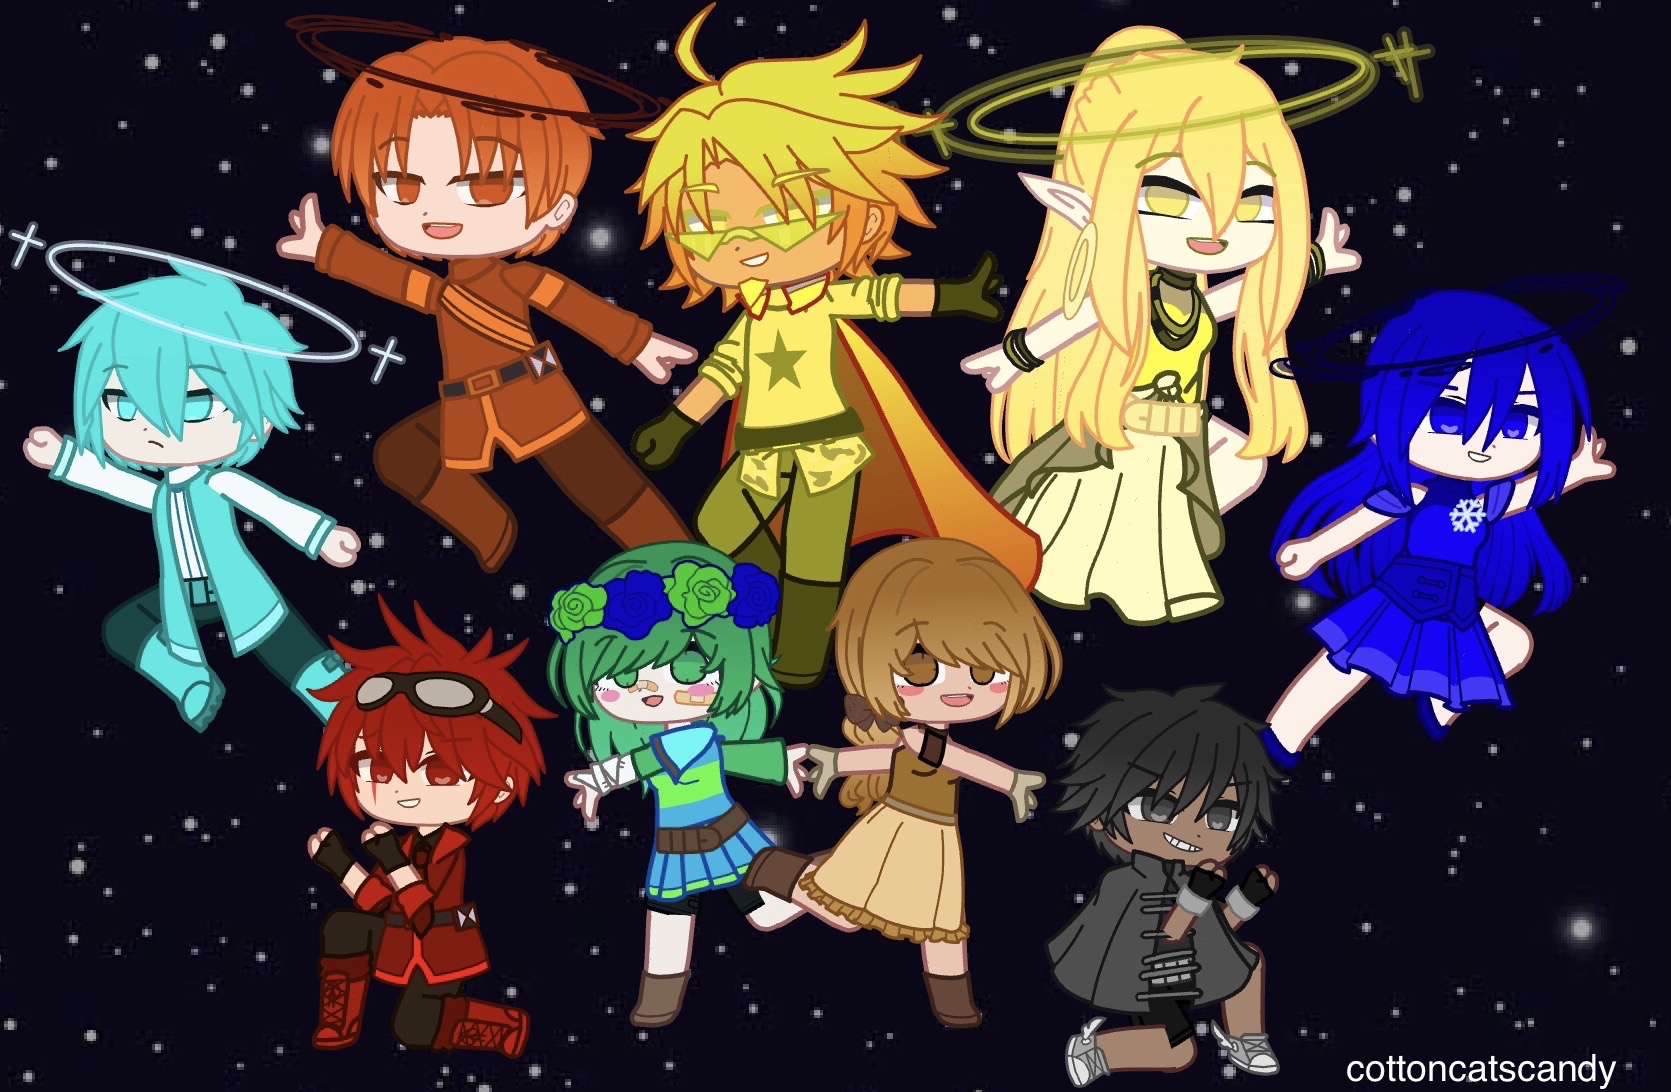 The Sun And The 8 Planets In Gacha By Cottoncatscandy On Deviantart